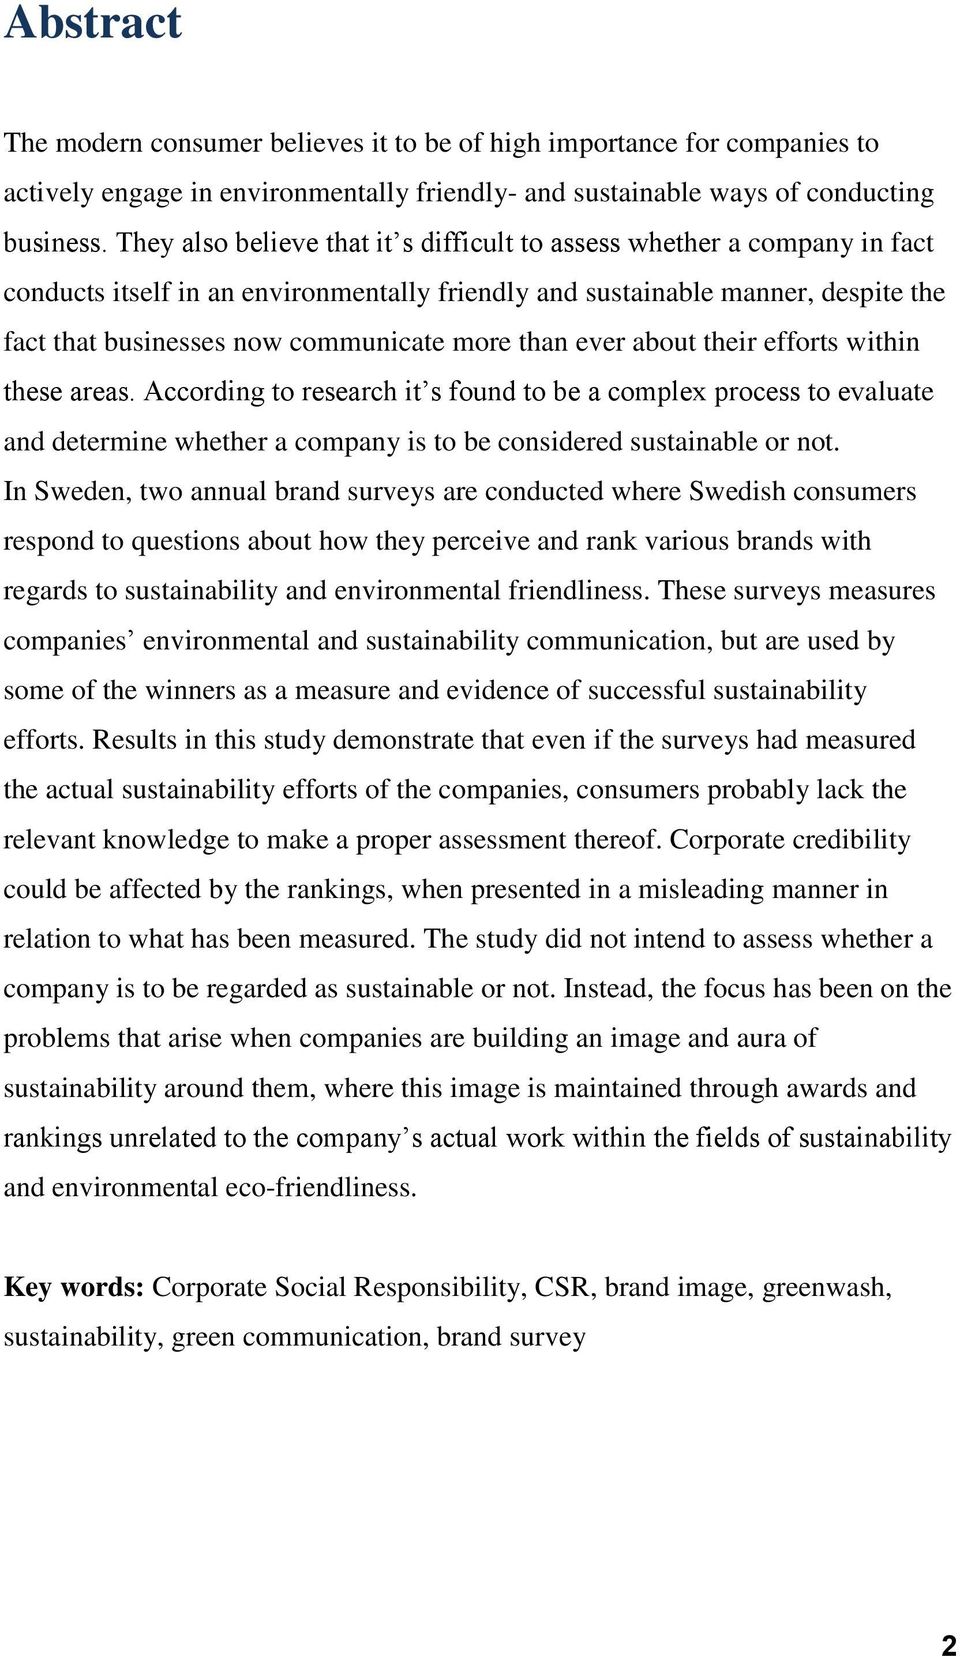 than ever about their efforts within these areas. According to research it s found to be a complex process to evaluate and determine whether a company is to be considered sustainable or not.